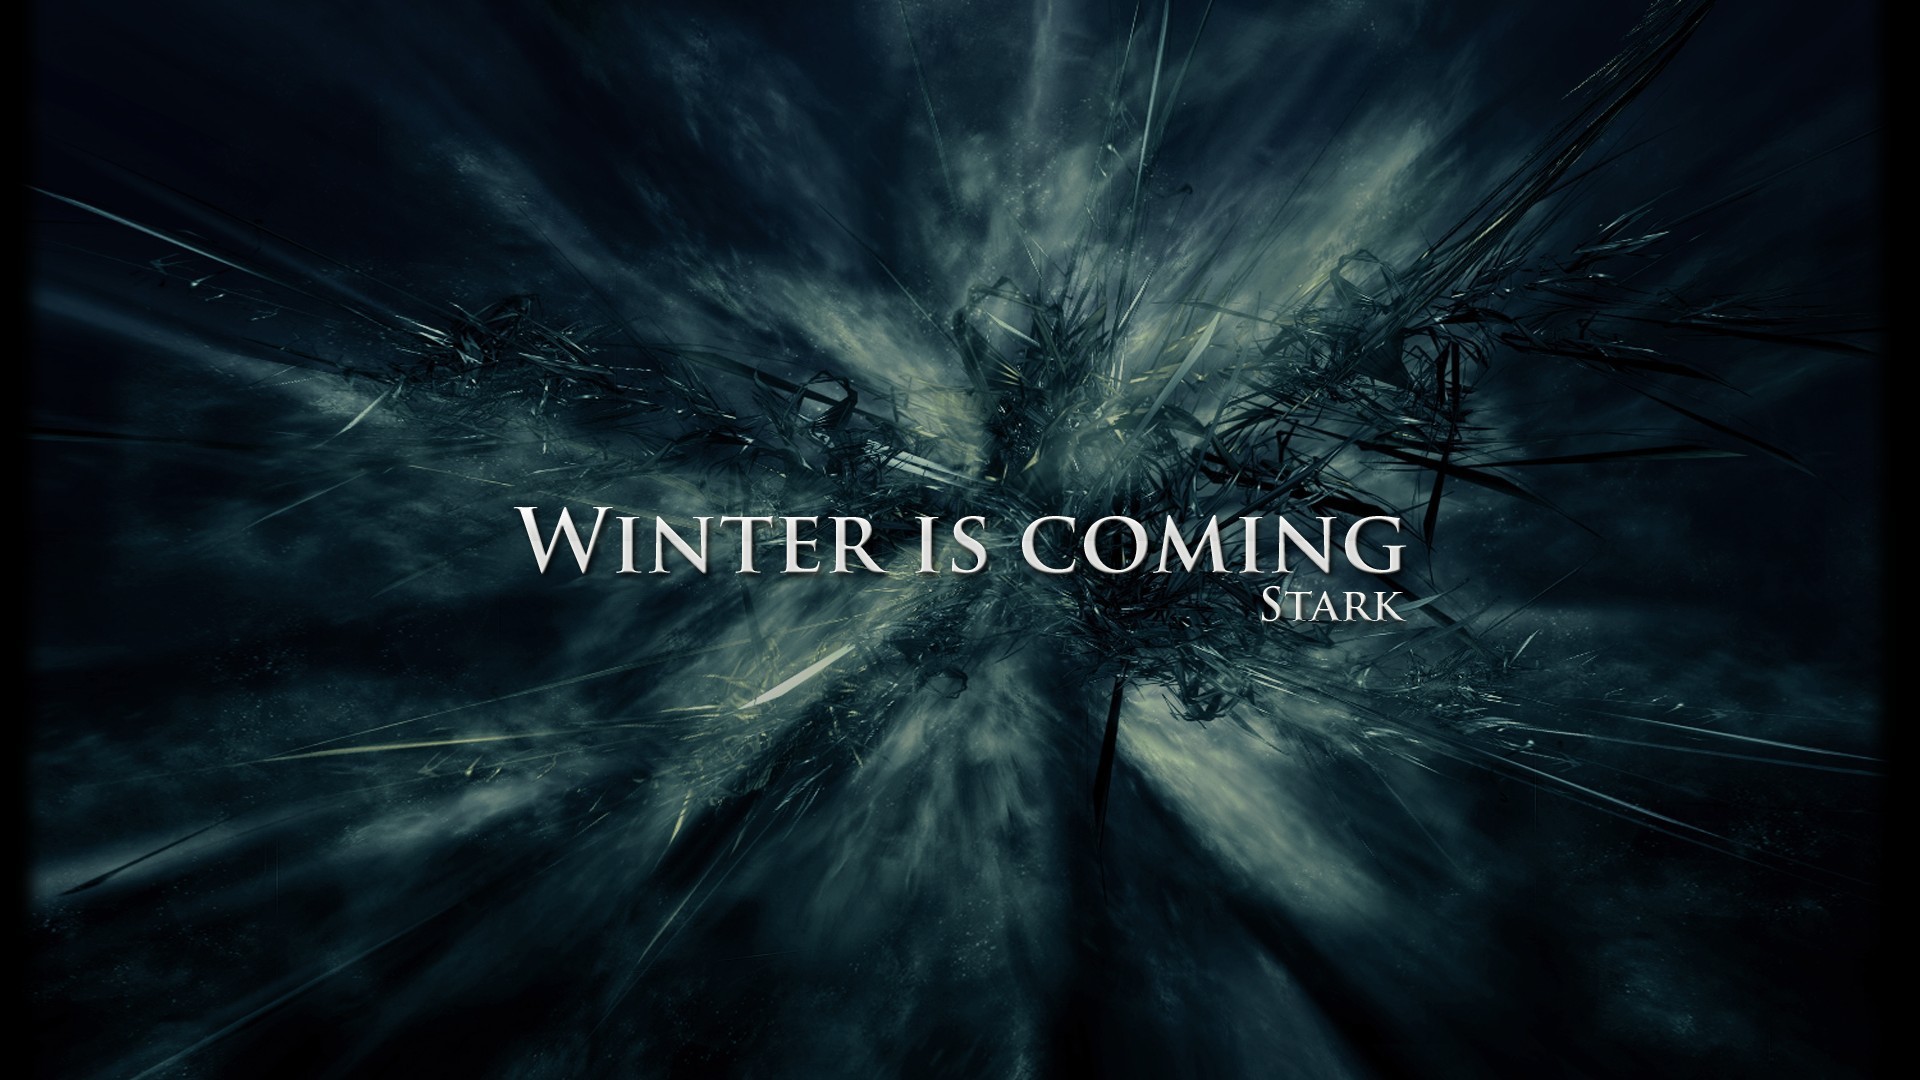 Game Of Thrones, A Song Of Ice And Fire, House Stark, Winter Is Coming Wallpaper